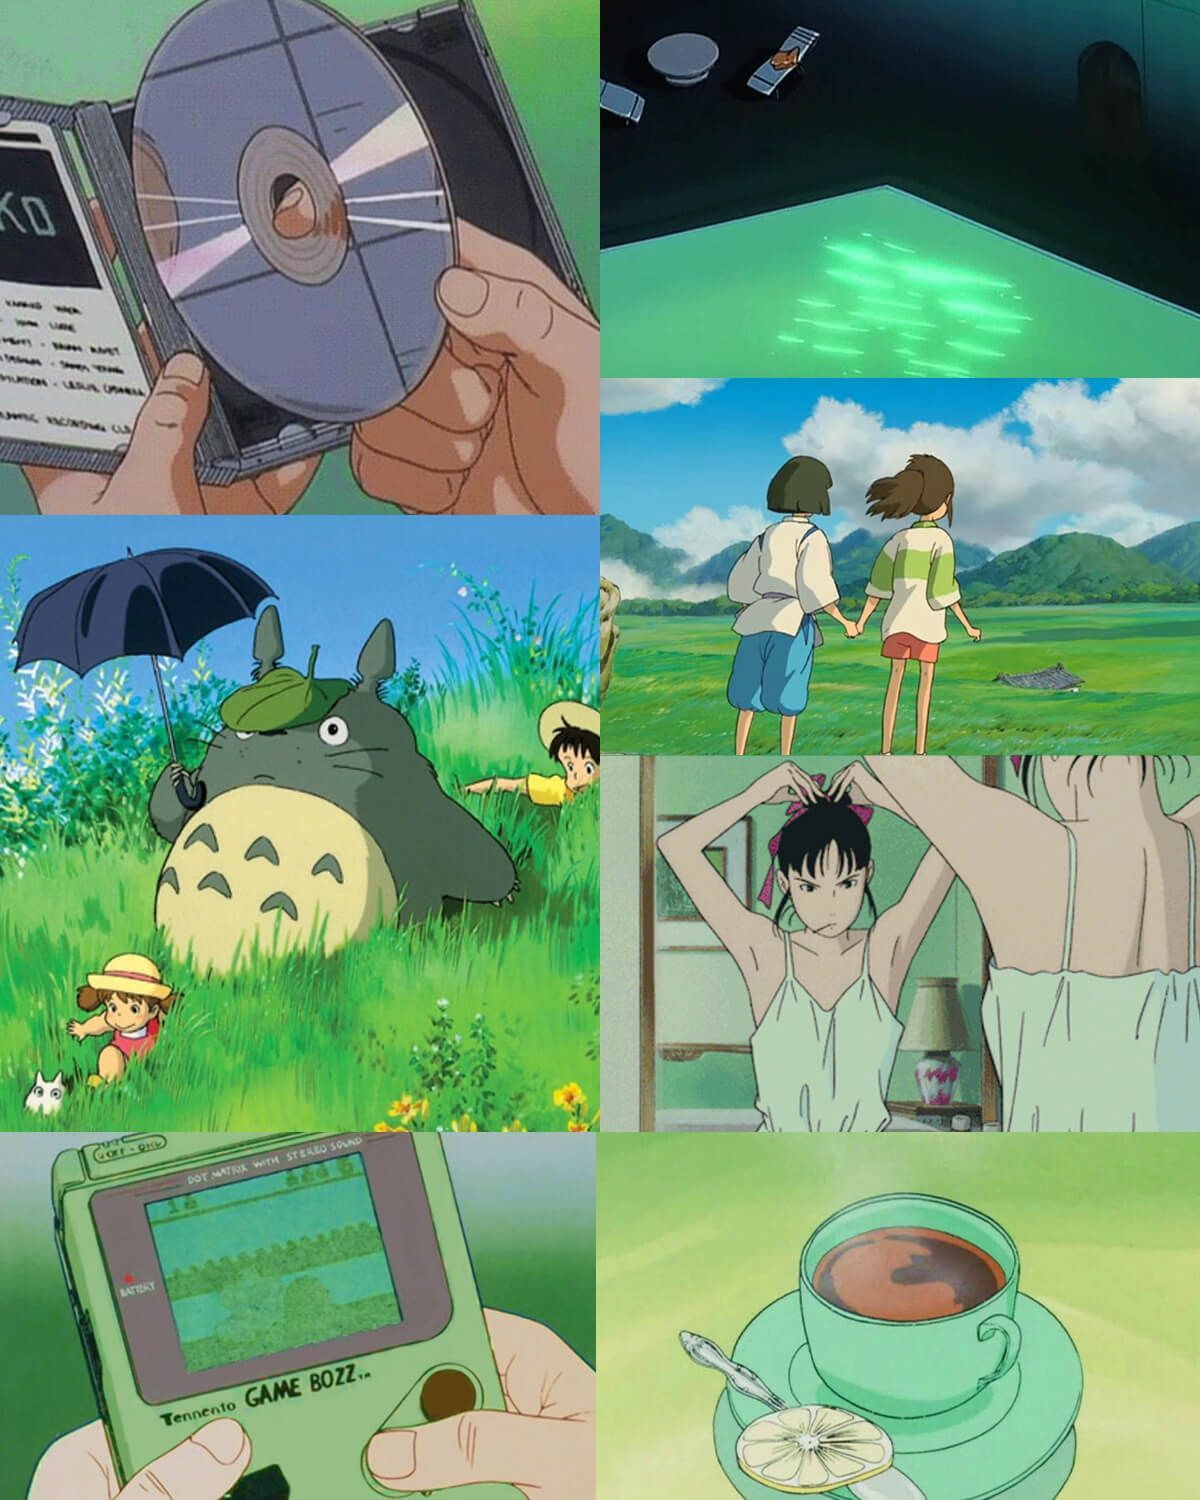 A collage of stills from My Neighbor Totoro, including a girl and boy walking through a field, a CD, a cup of coffee, and a Game Boy. - Soft green